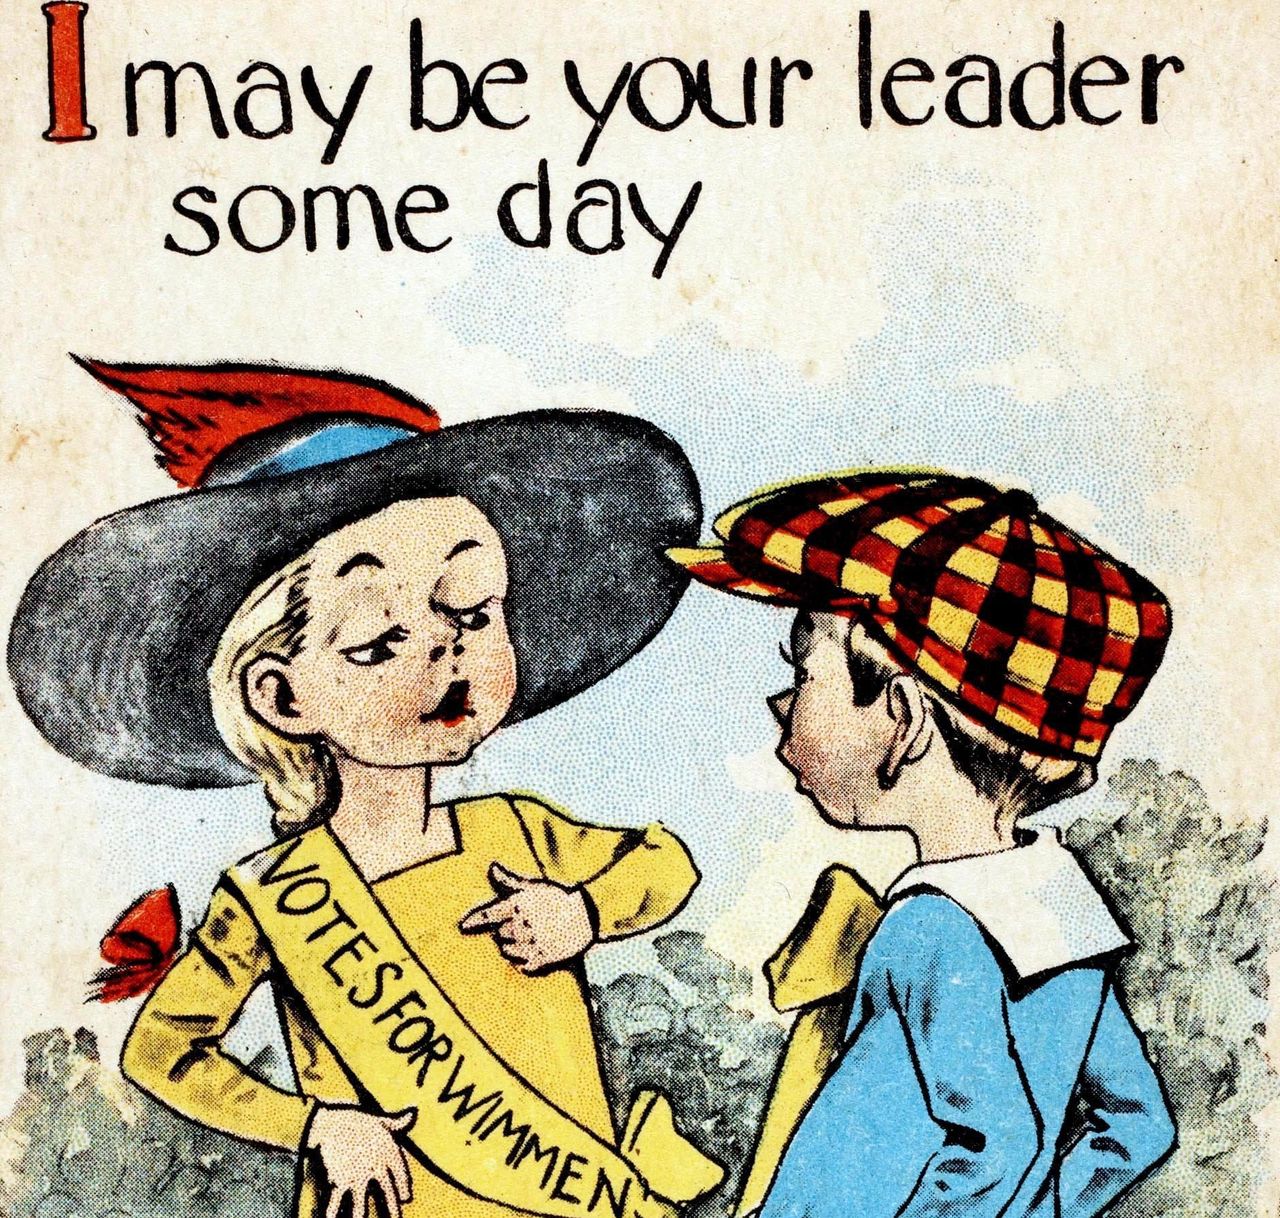 A 1912 color illustration of a girl wearing a yellow banner which has "Votes for Wimmen." 